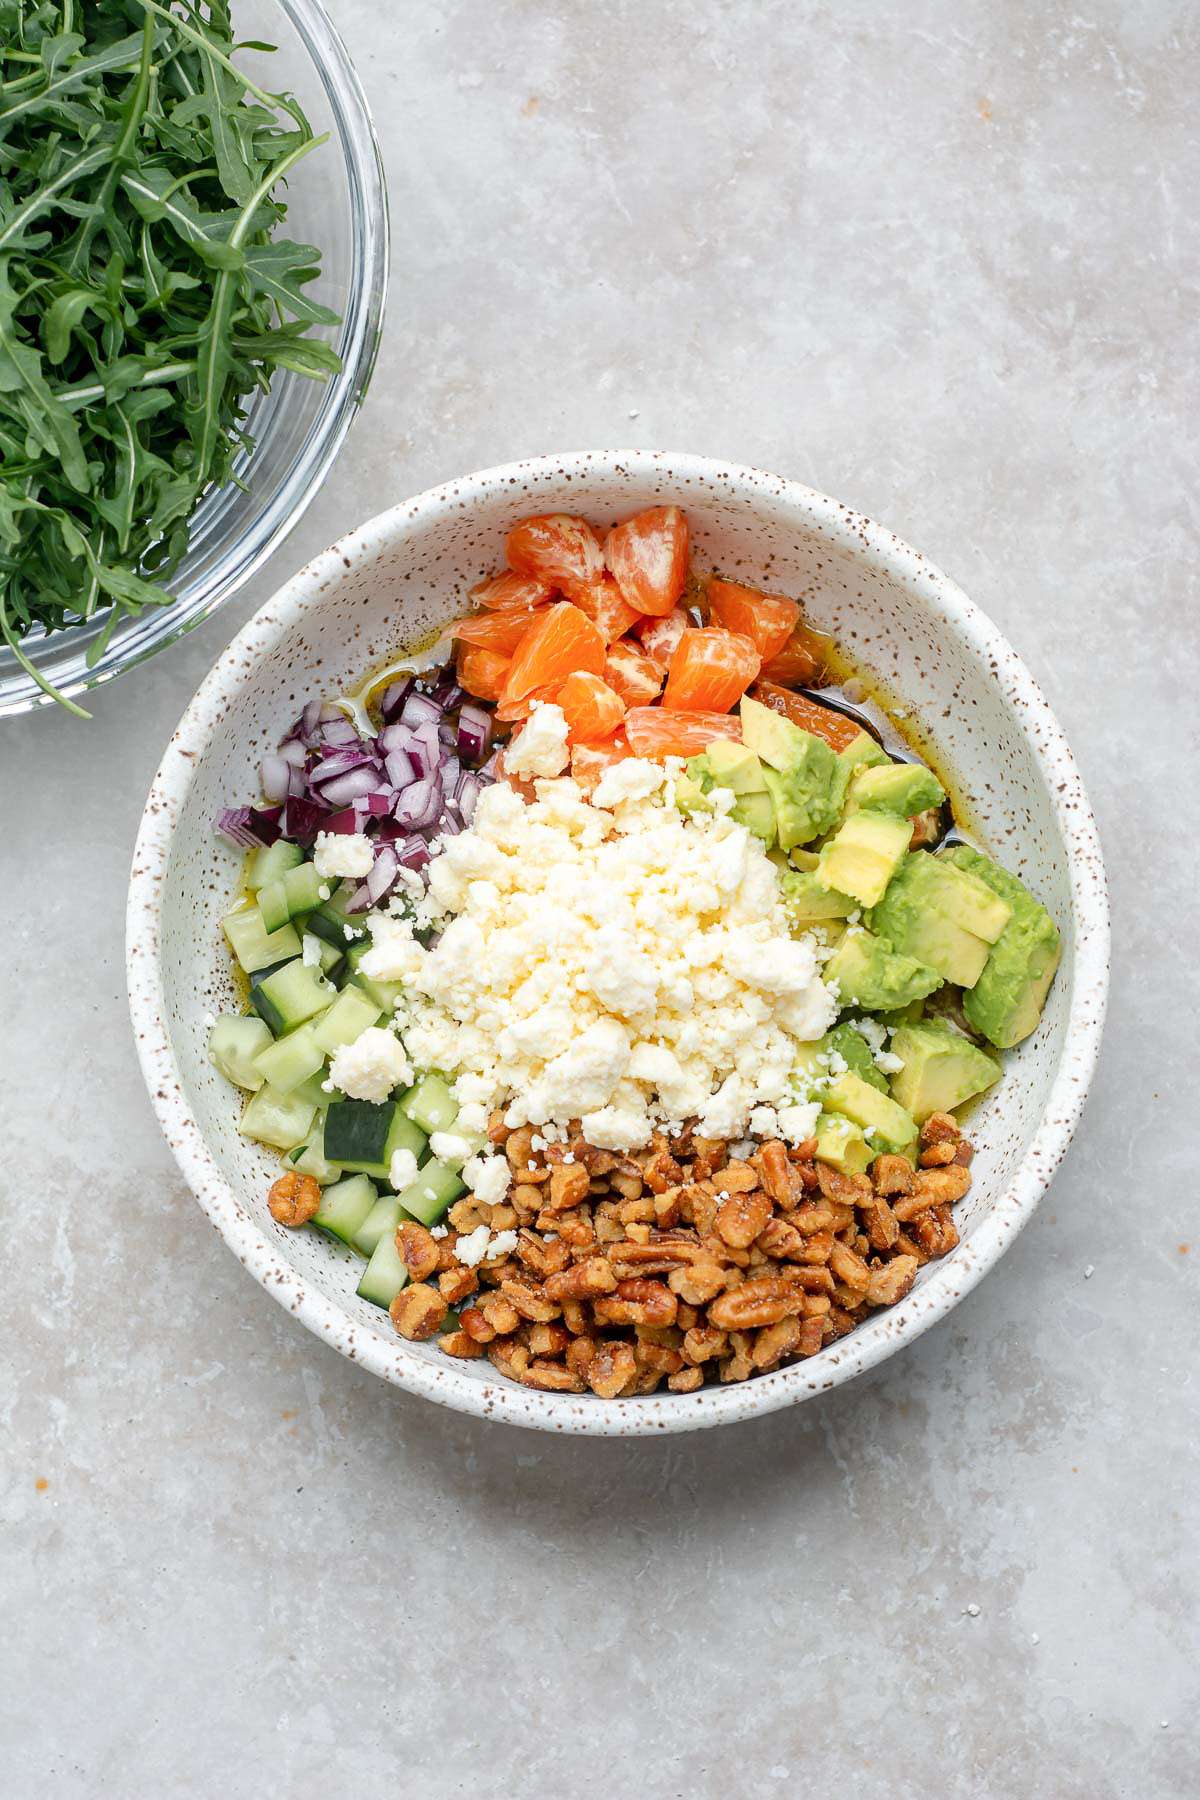 Feta cheese in a bowl with chopped pecans, orange, cucumber and red onion.